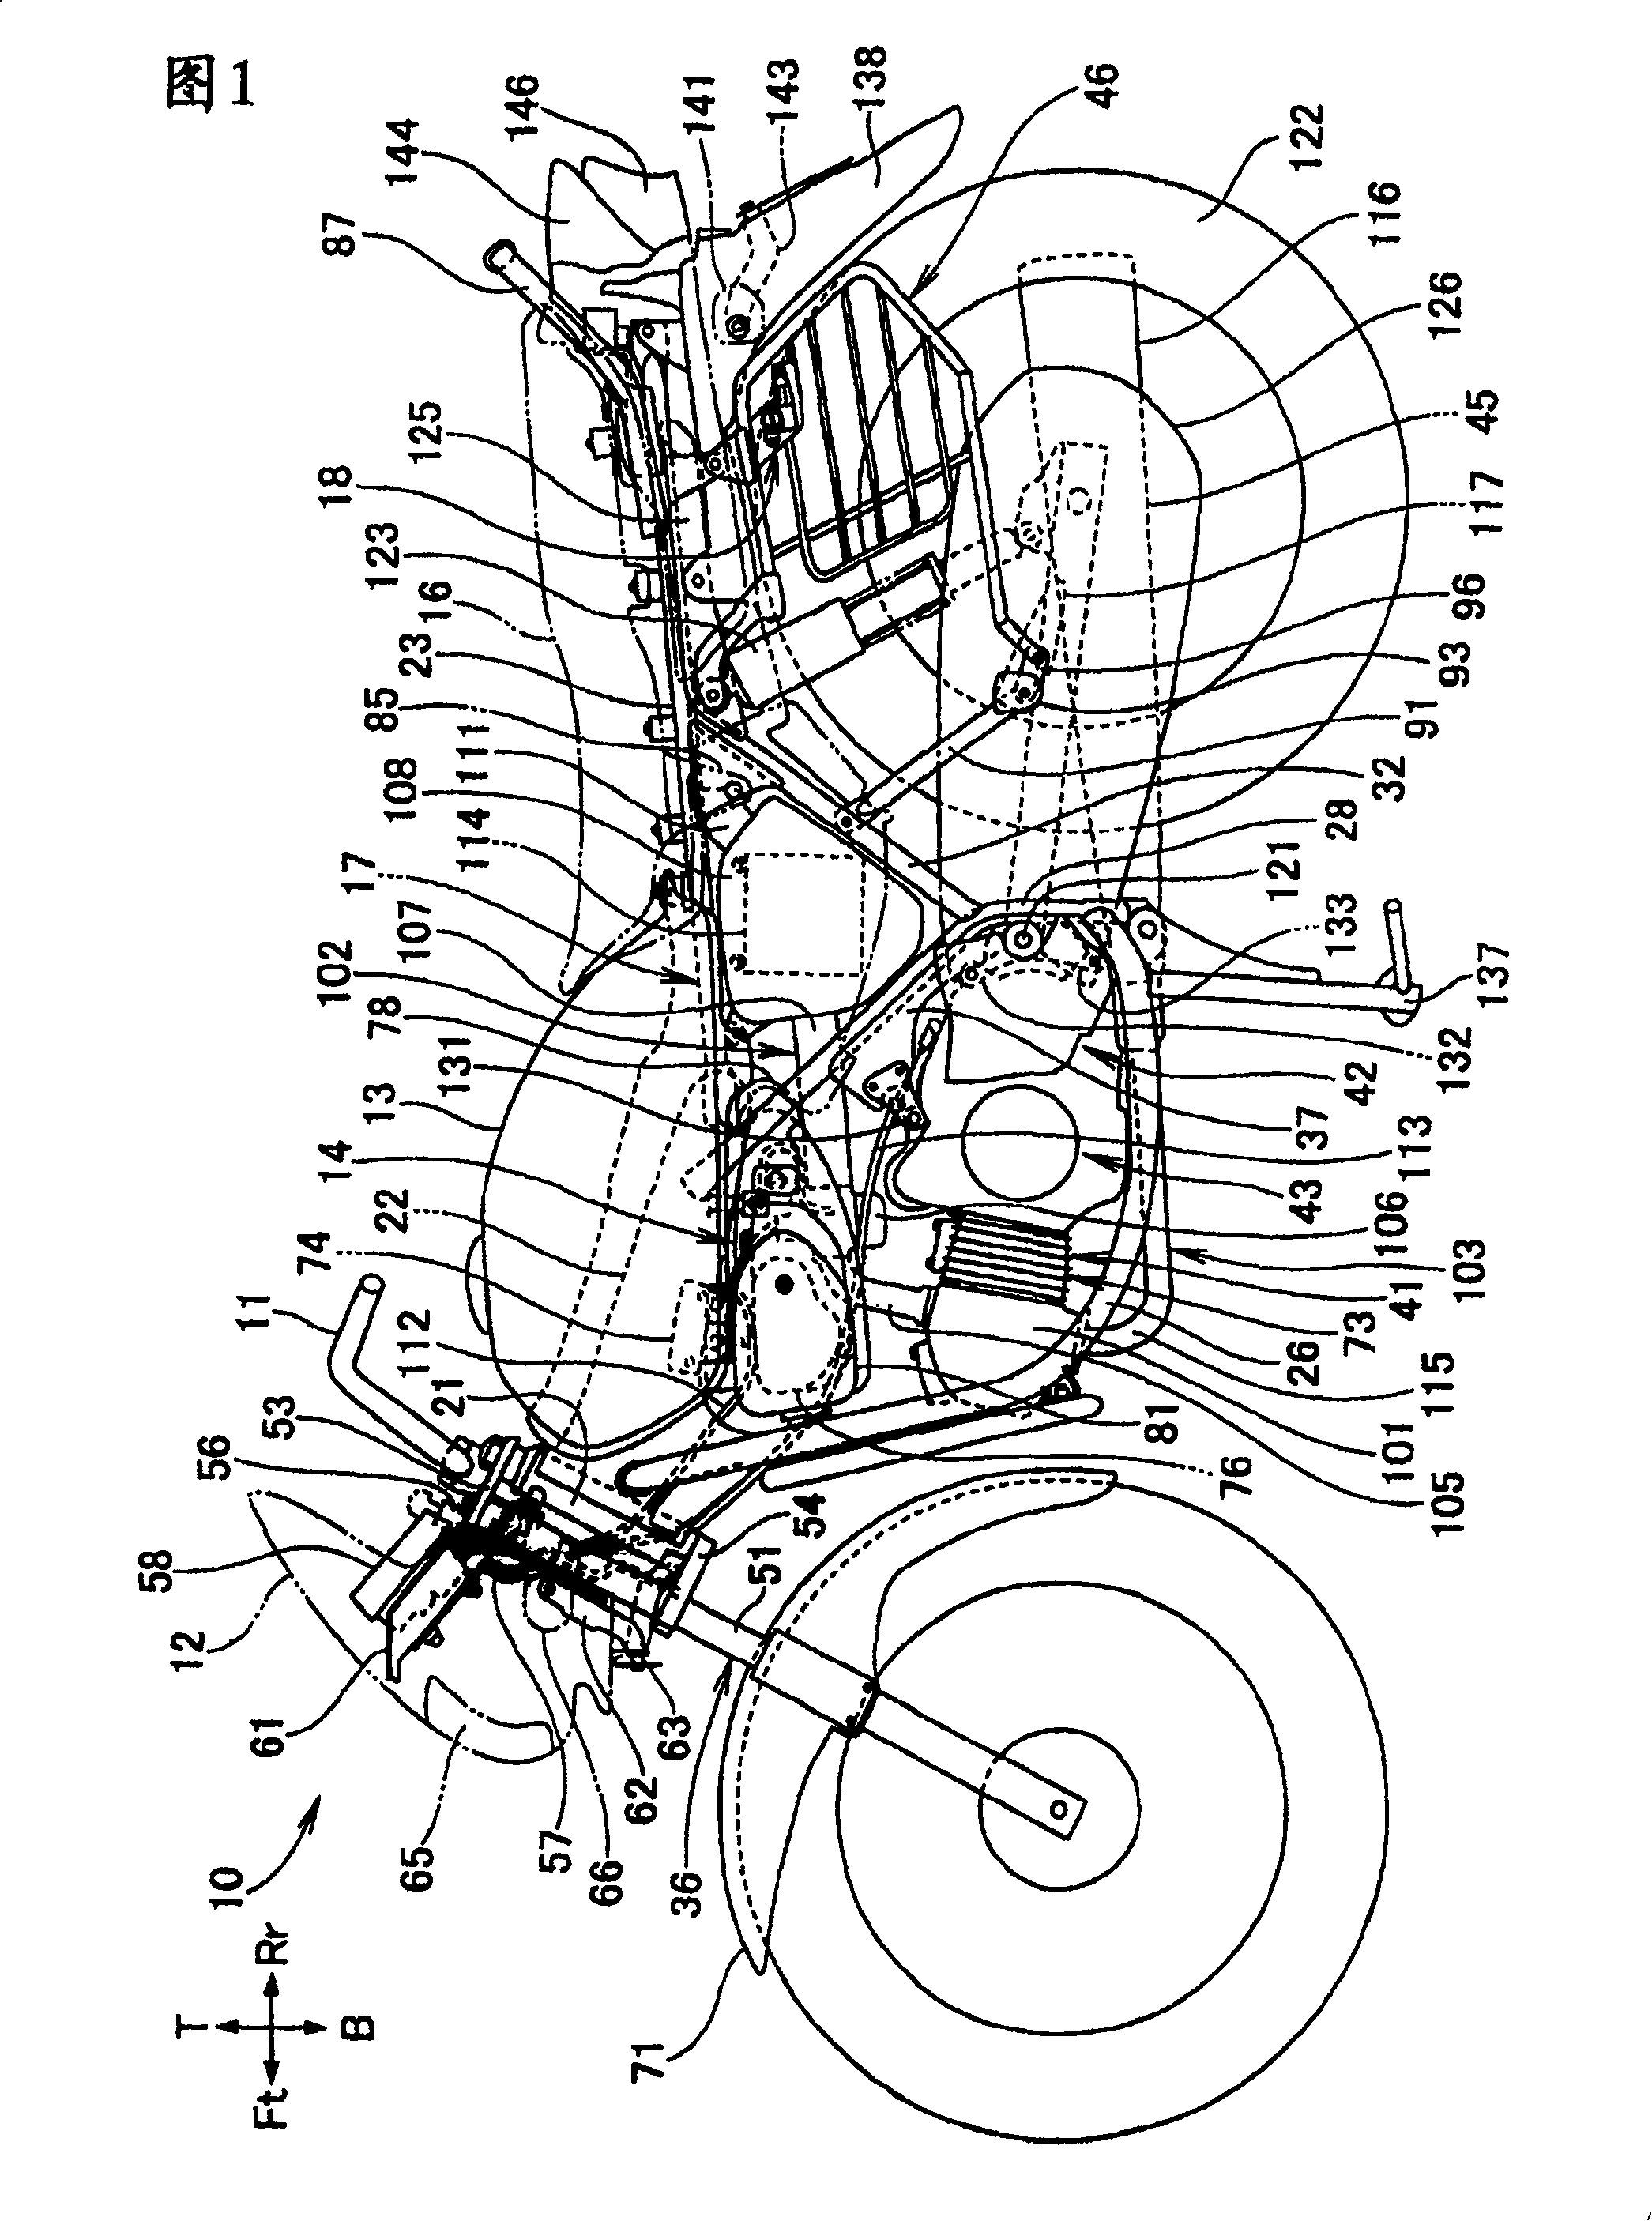 Mounting structure for helmet holder of two-wheeled automobile